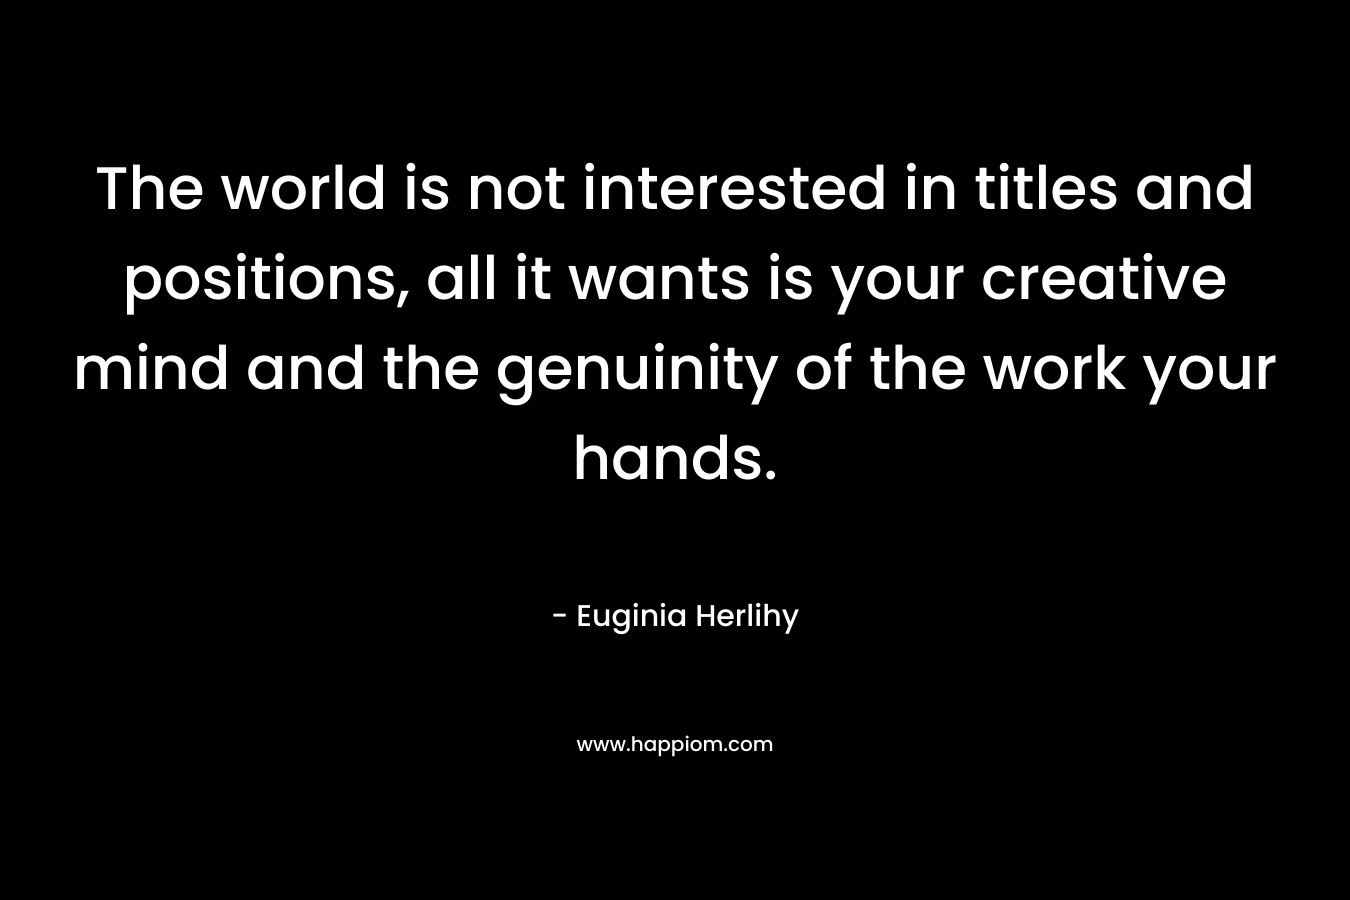 The world is not interested in titles and positions, all it wants is your creative mind and the genuinity of the work your hands.